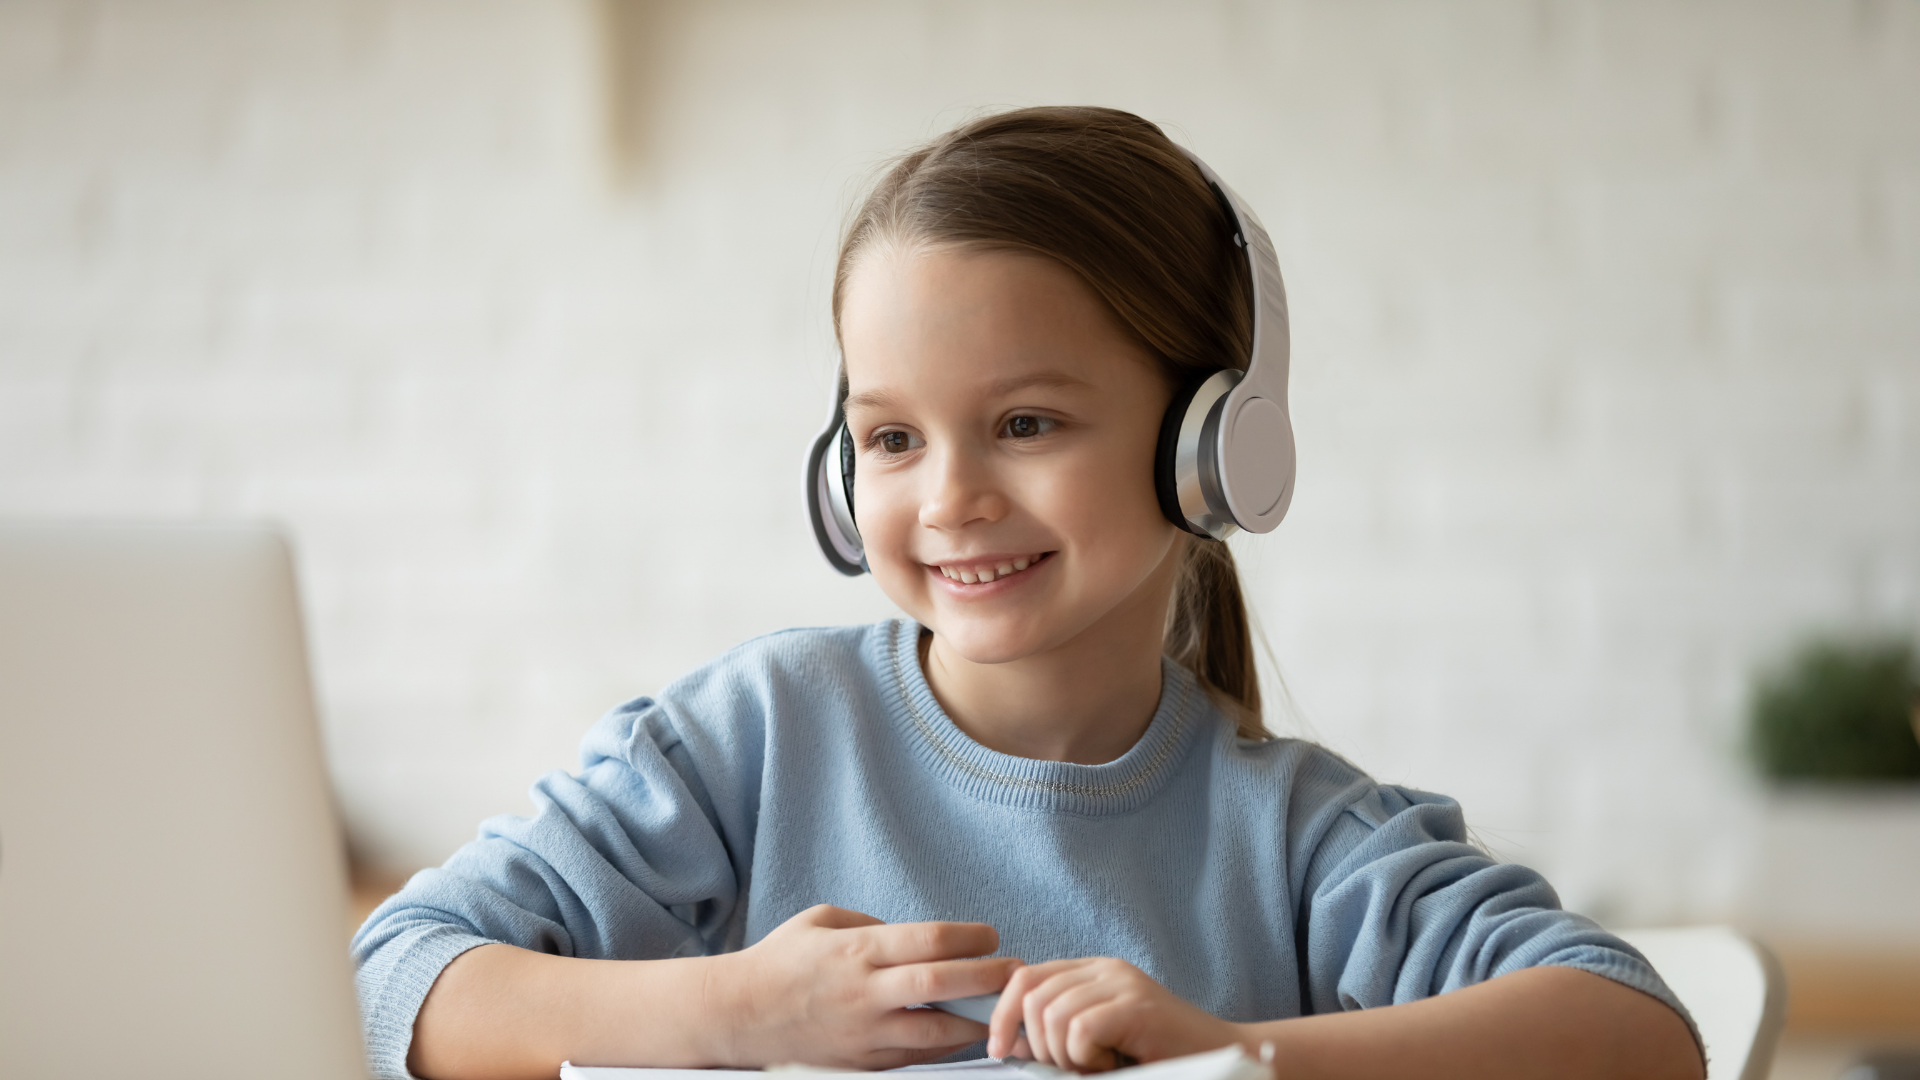 Best Buy offers great headphone options for any child